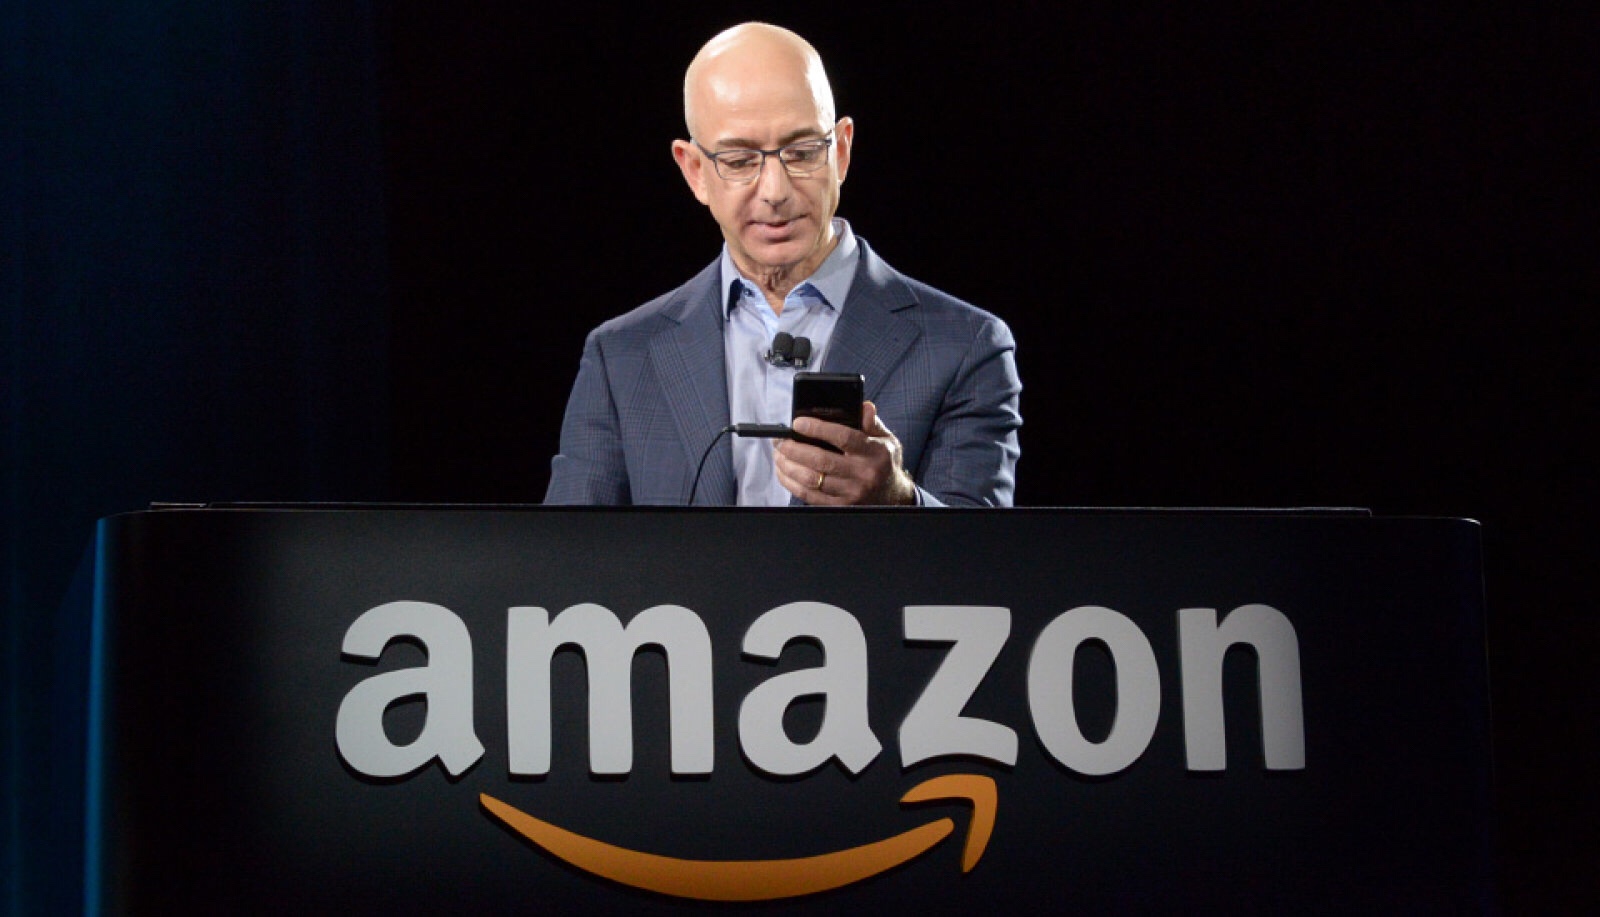 Amazon has hired former FDA exec Taha Kass-Hout for its secret healthcare team